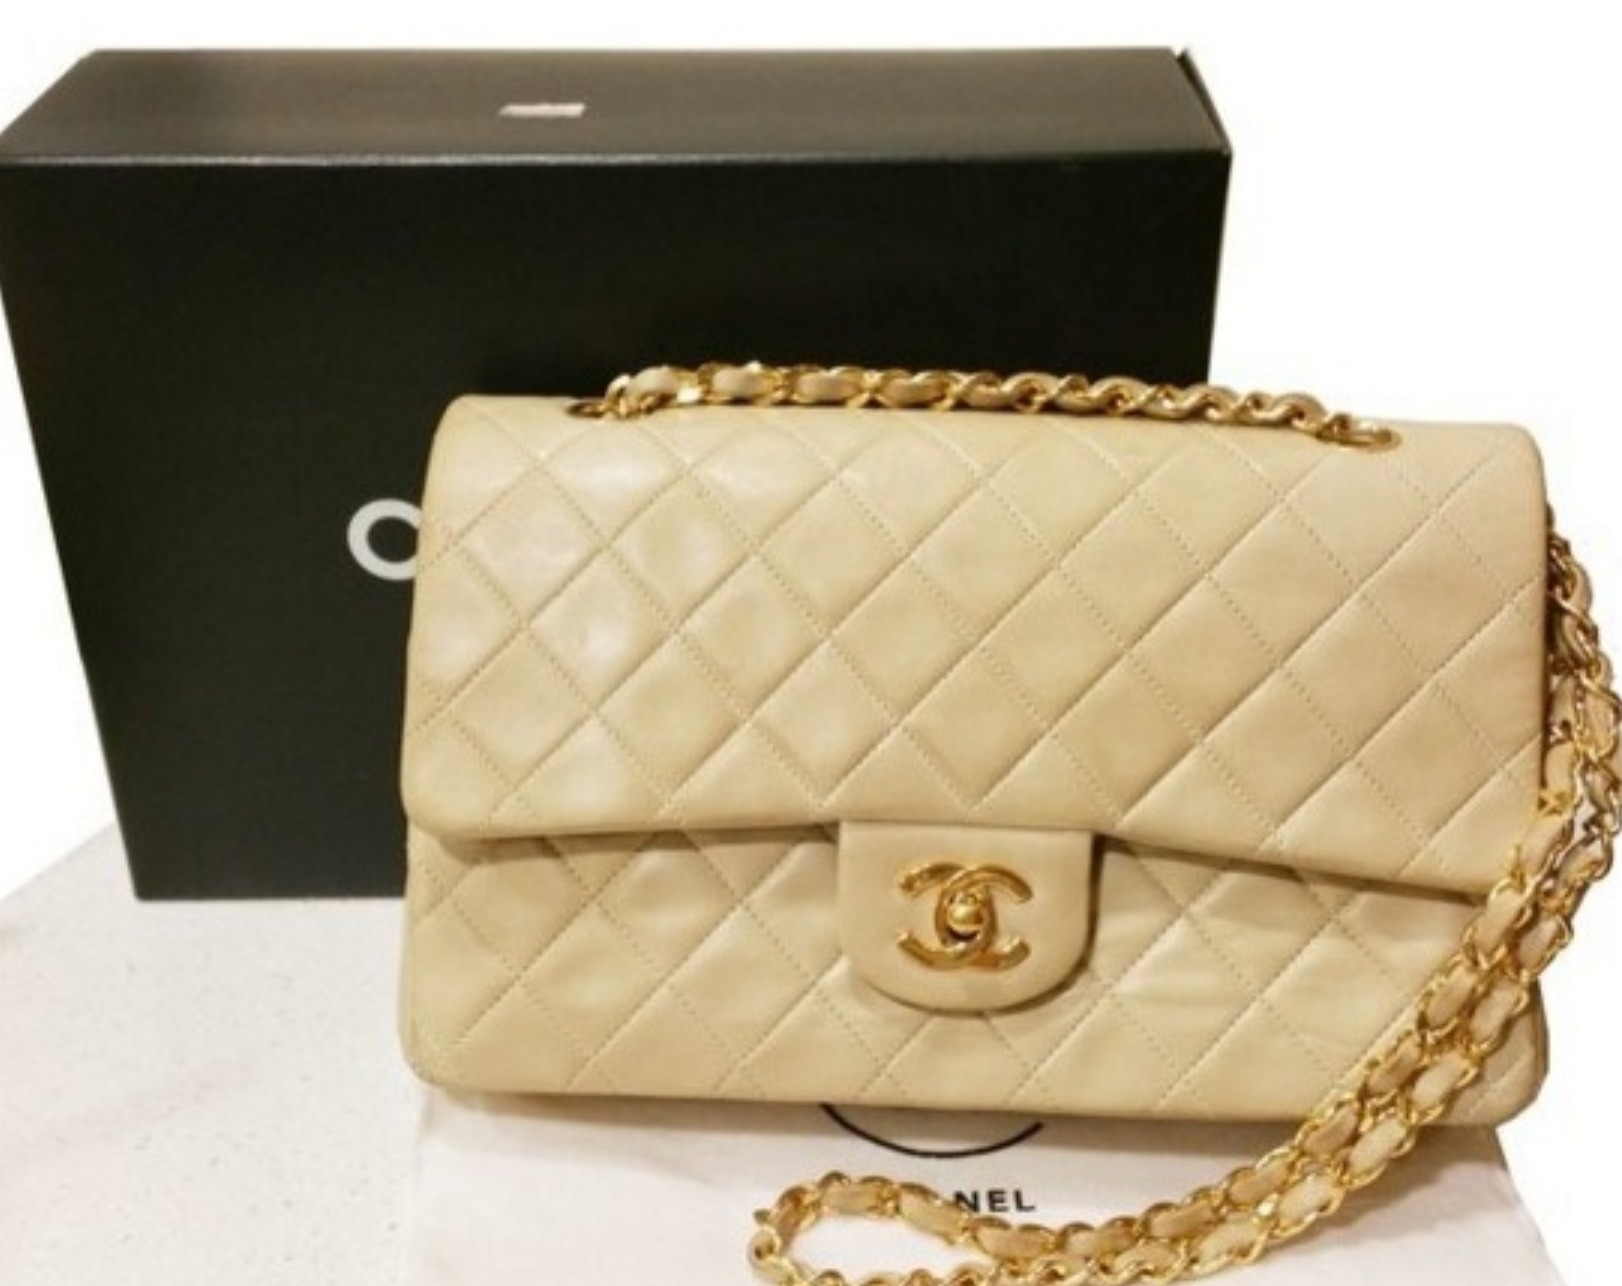 Chanel bans crocodile and lizard skin from its collections